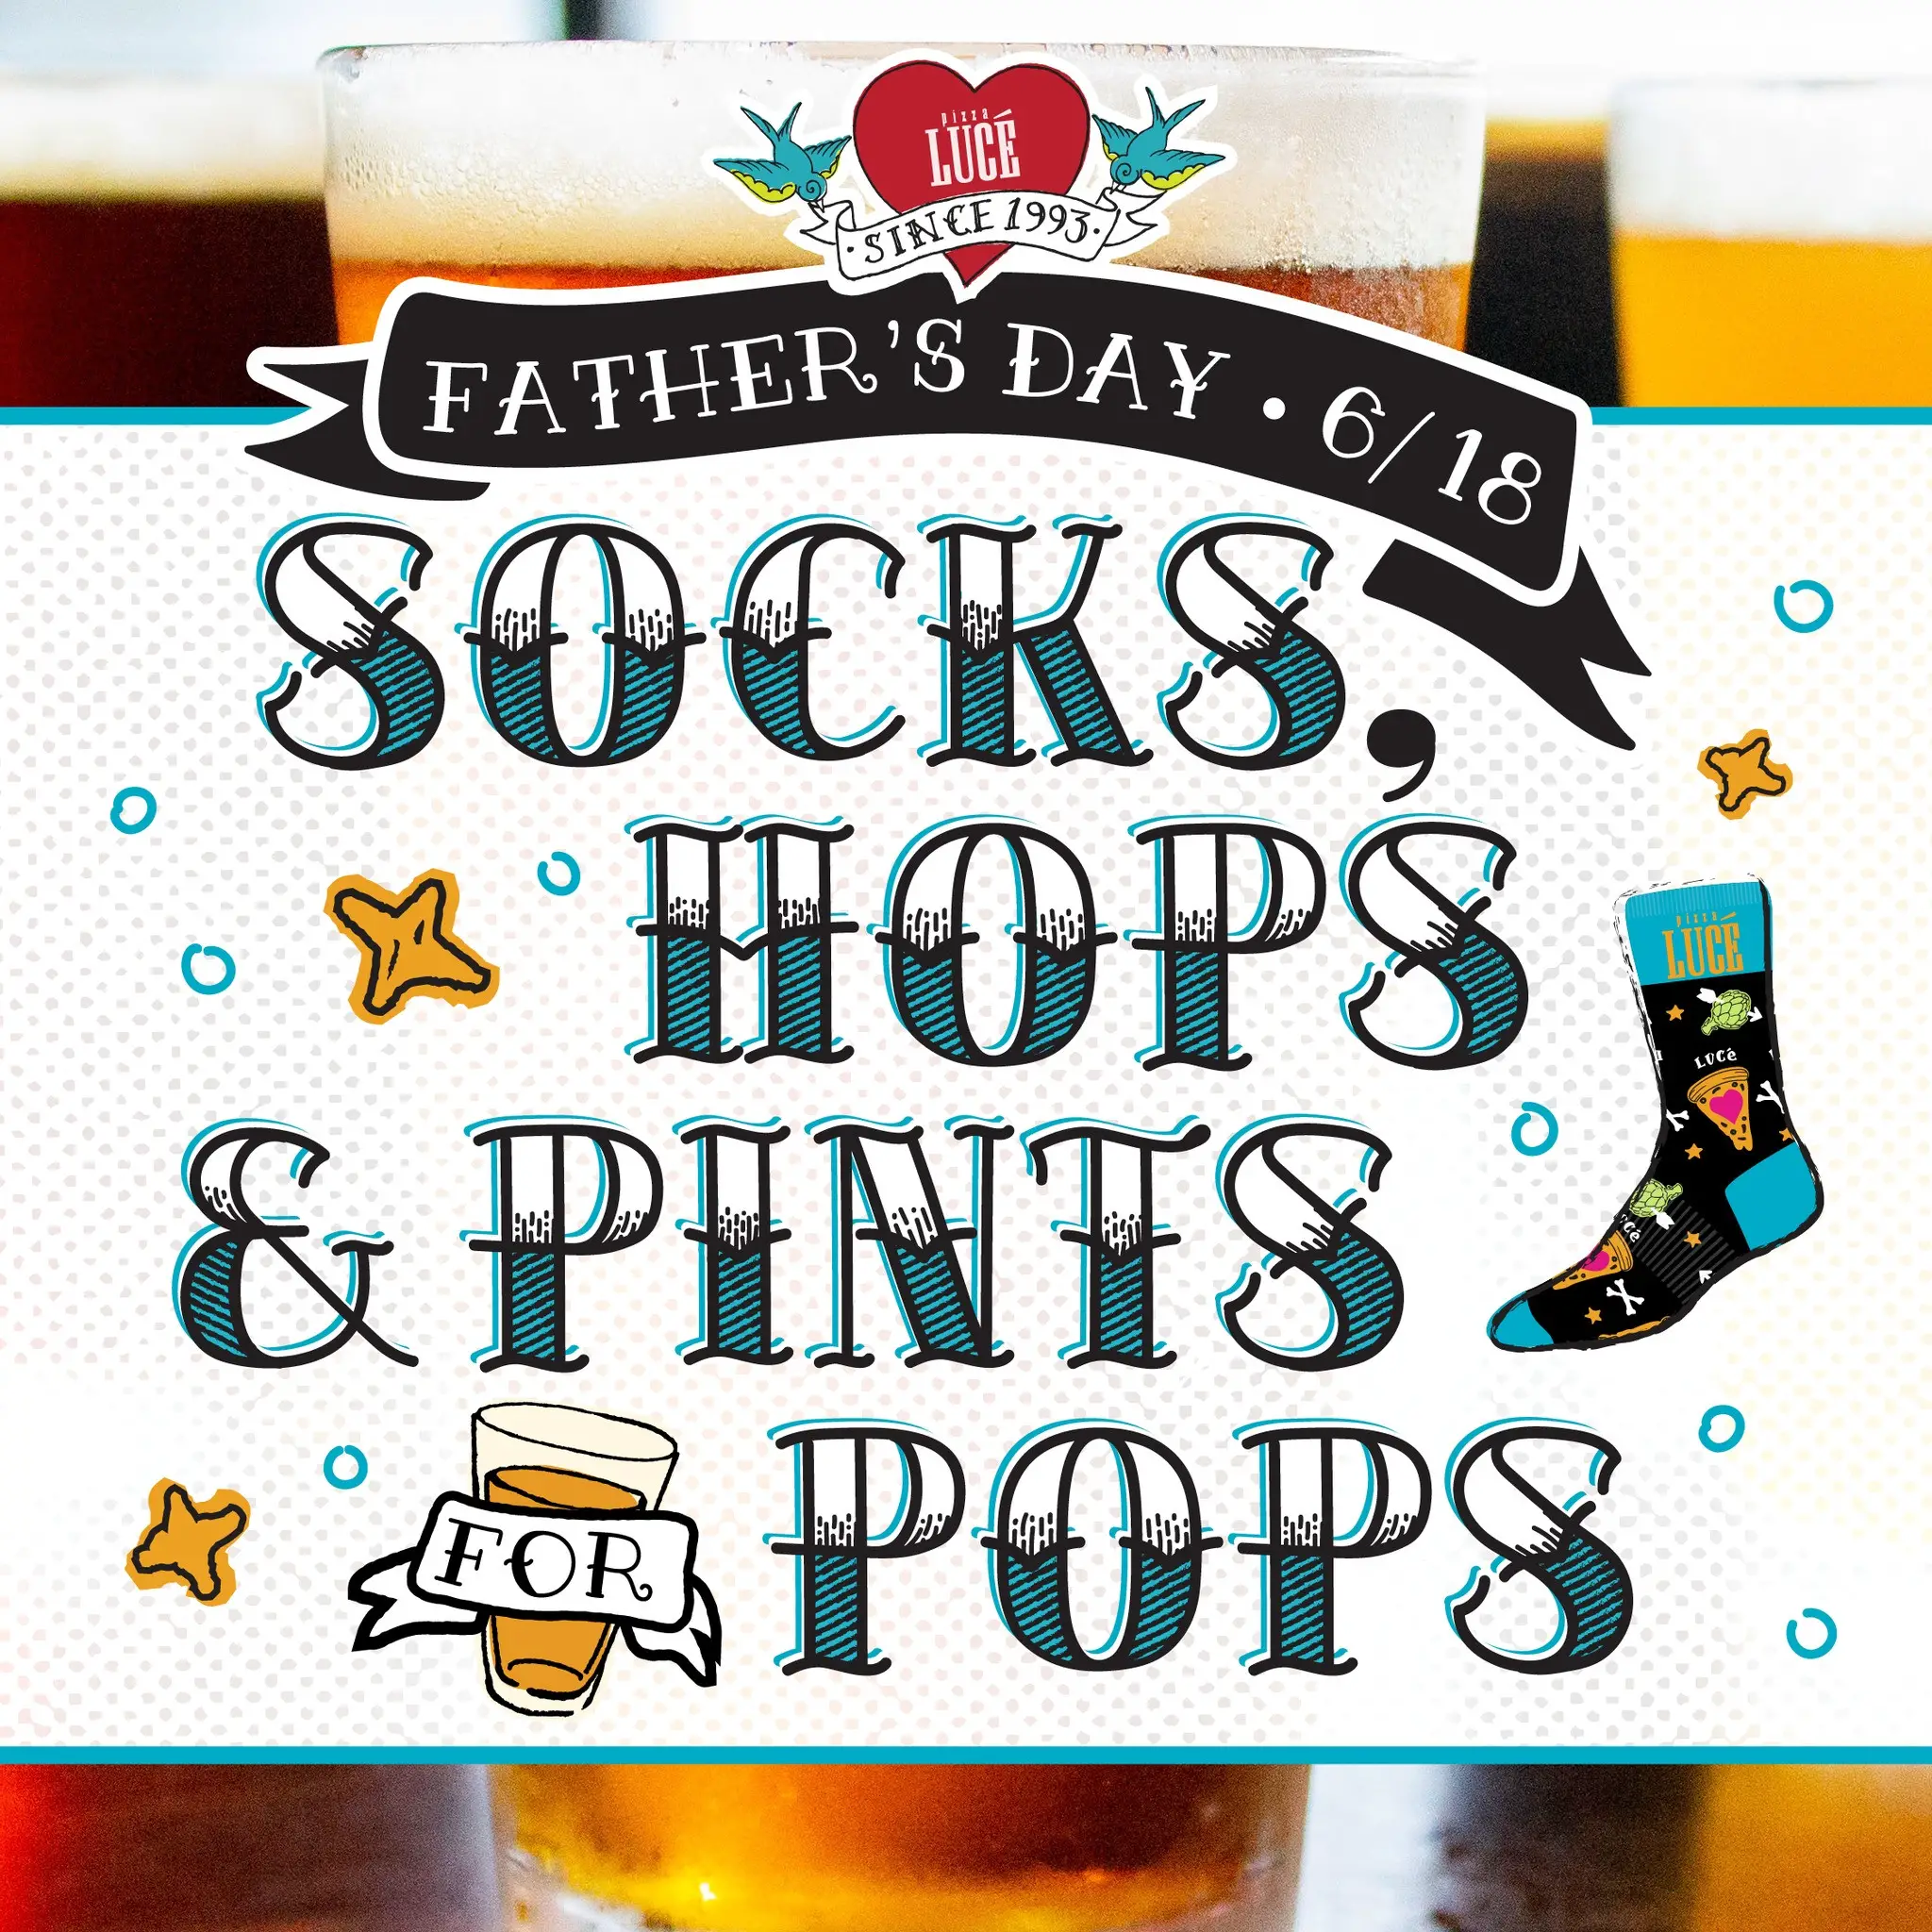 Pizza Lucé Father's Day Free Pint and Socks on Father's Day